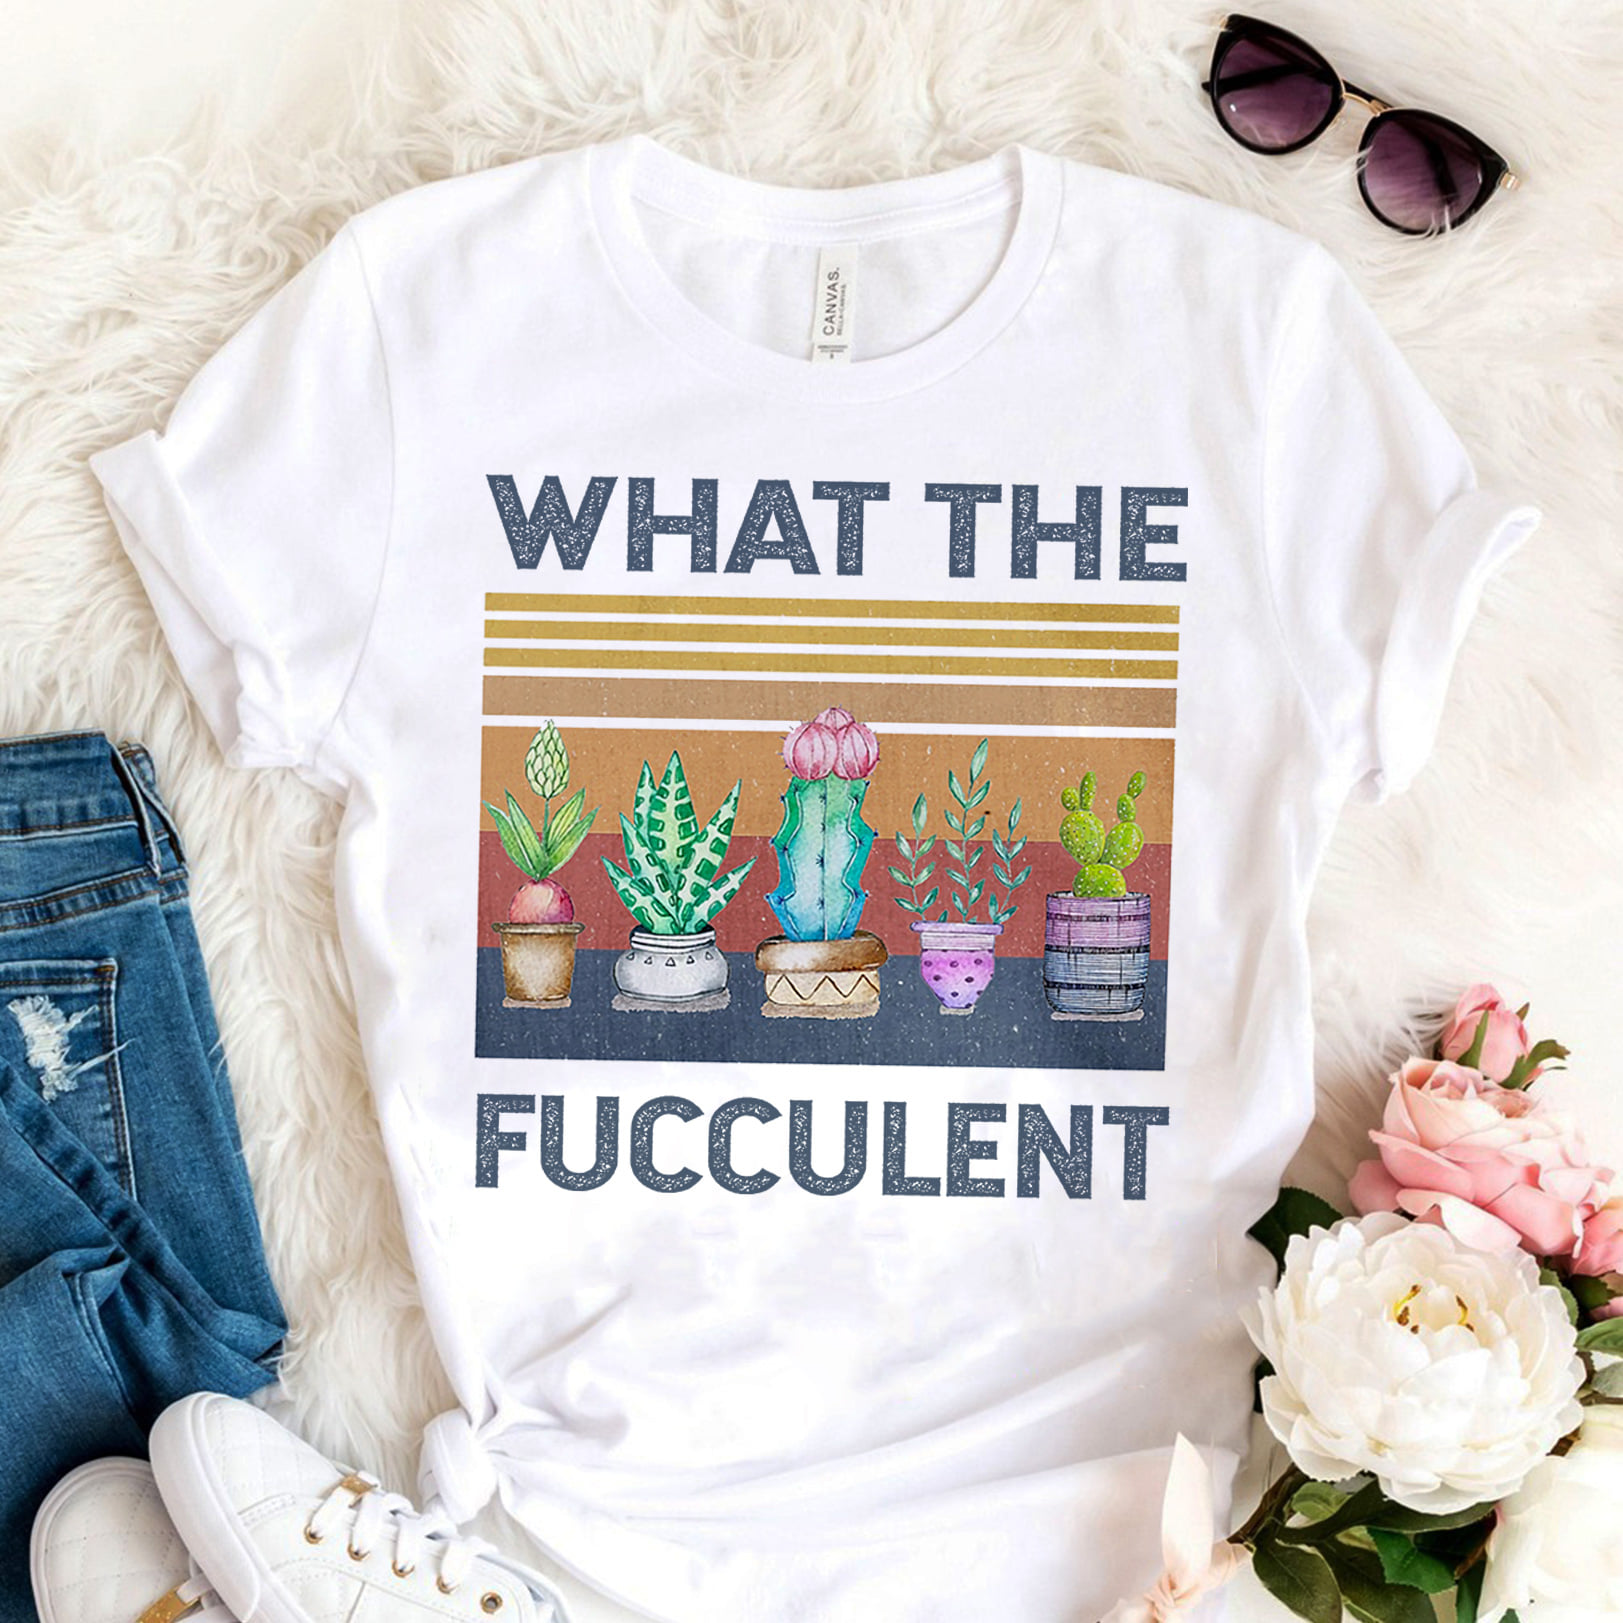 What the fucculent - Vessels of plants